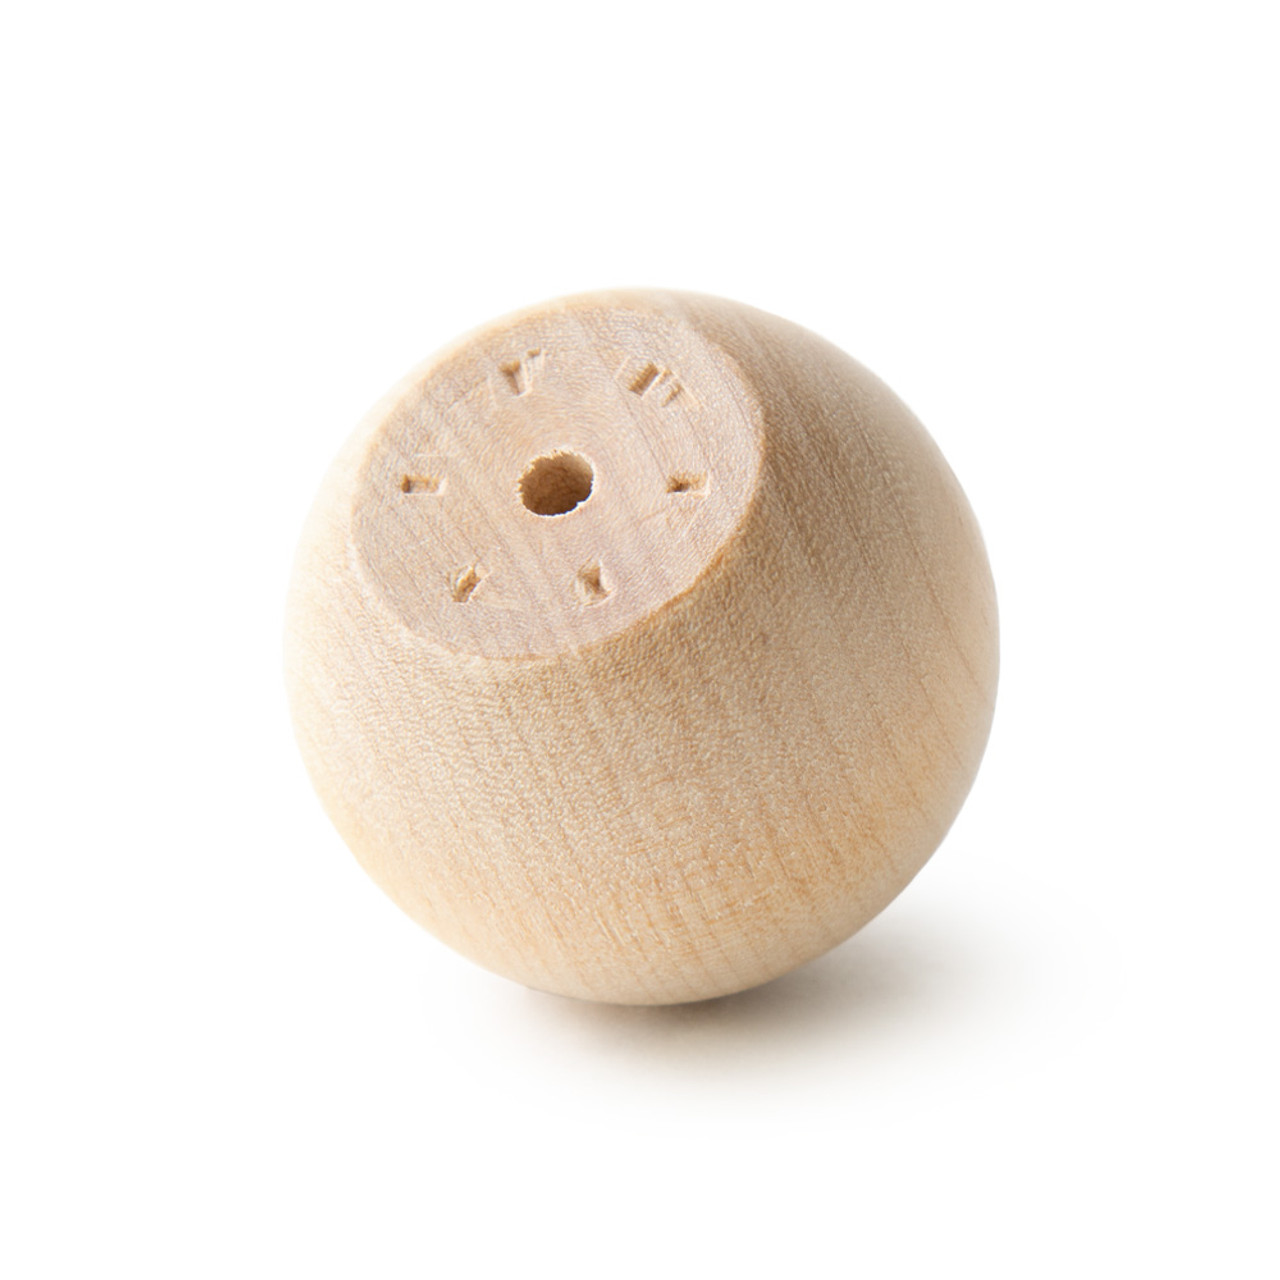 Wooden ball knob 2 (2 inch ball knob) solid wood set of 6 – Craft Supply  House